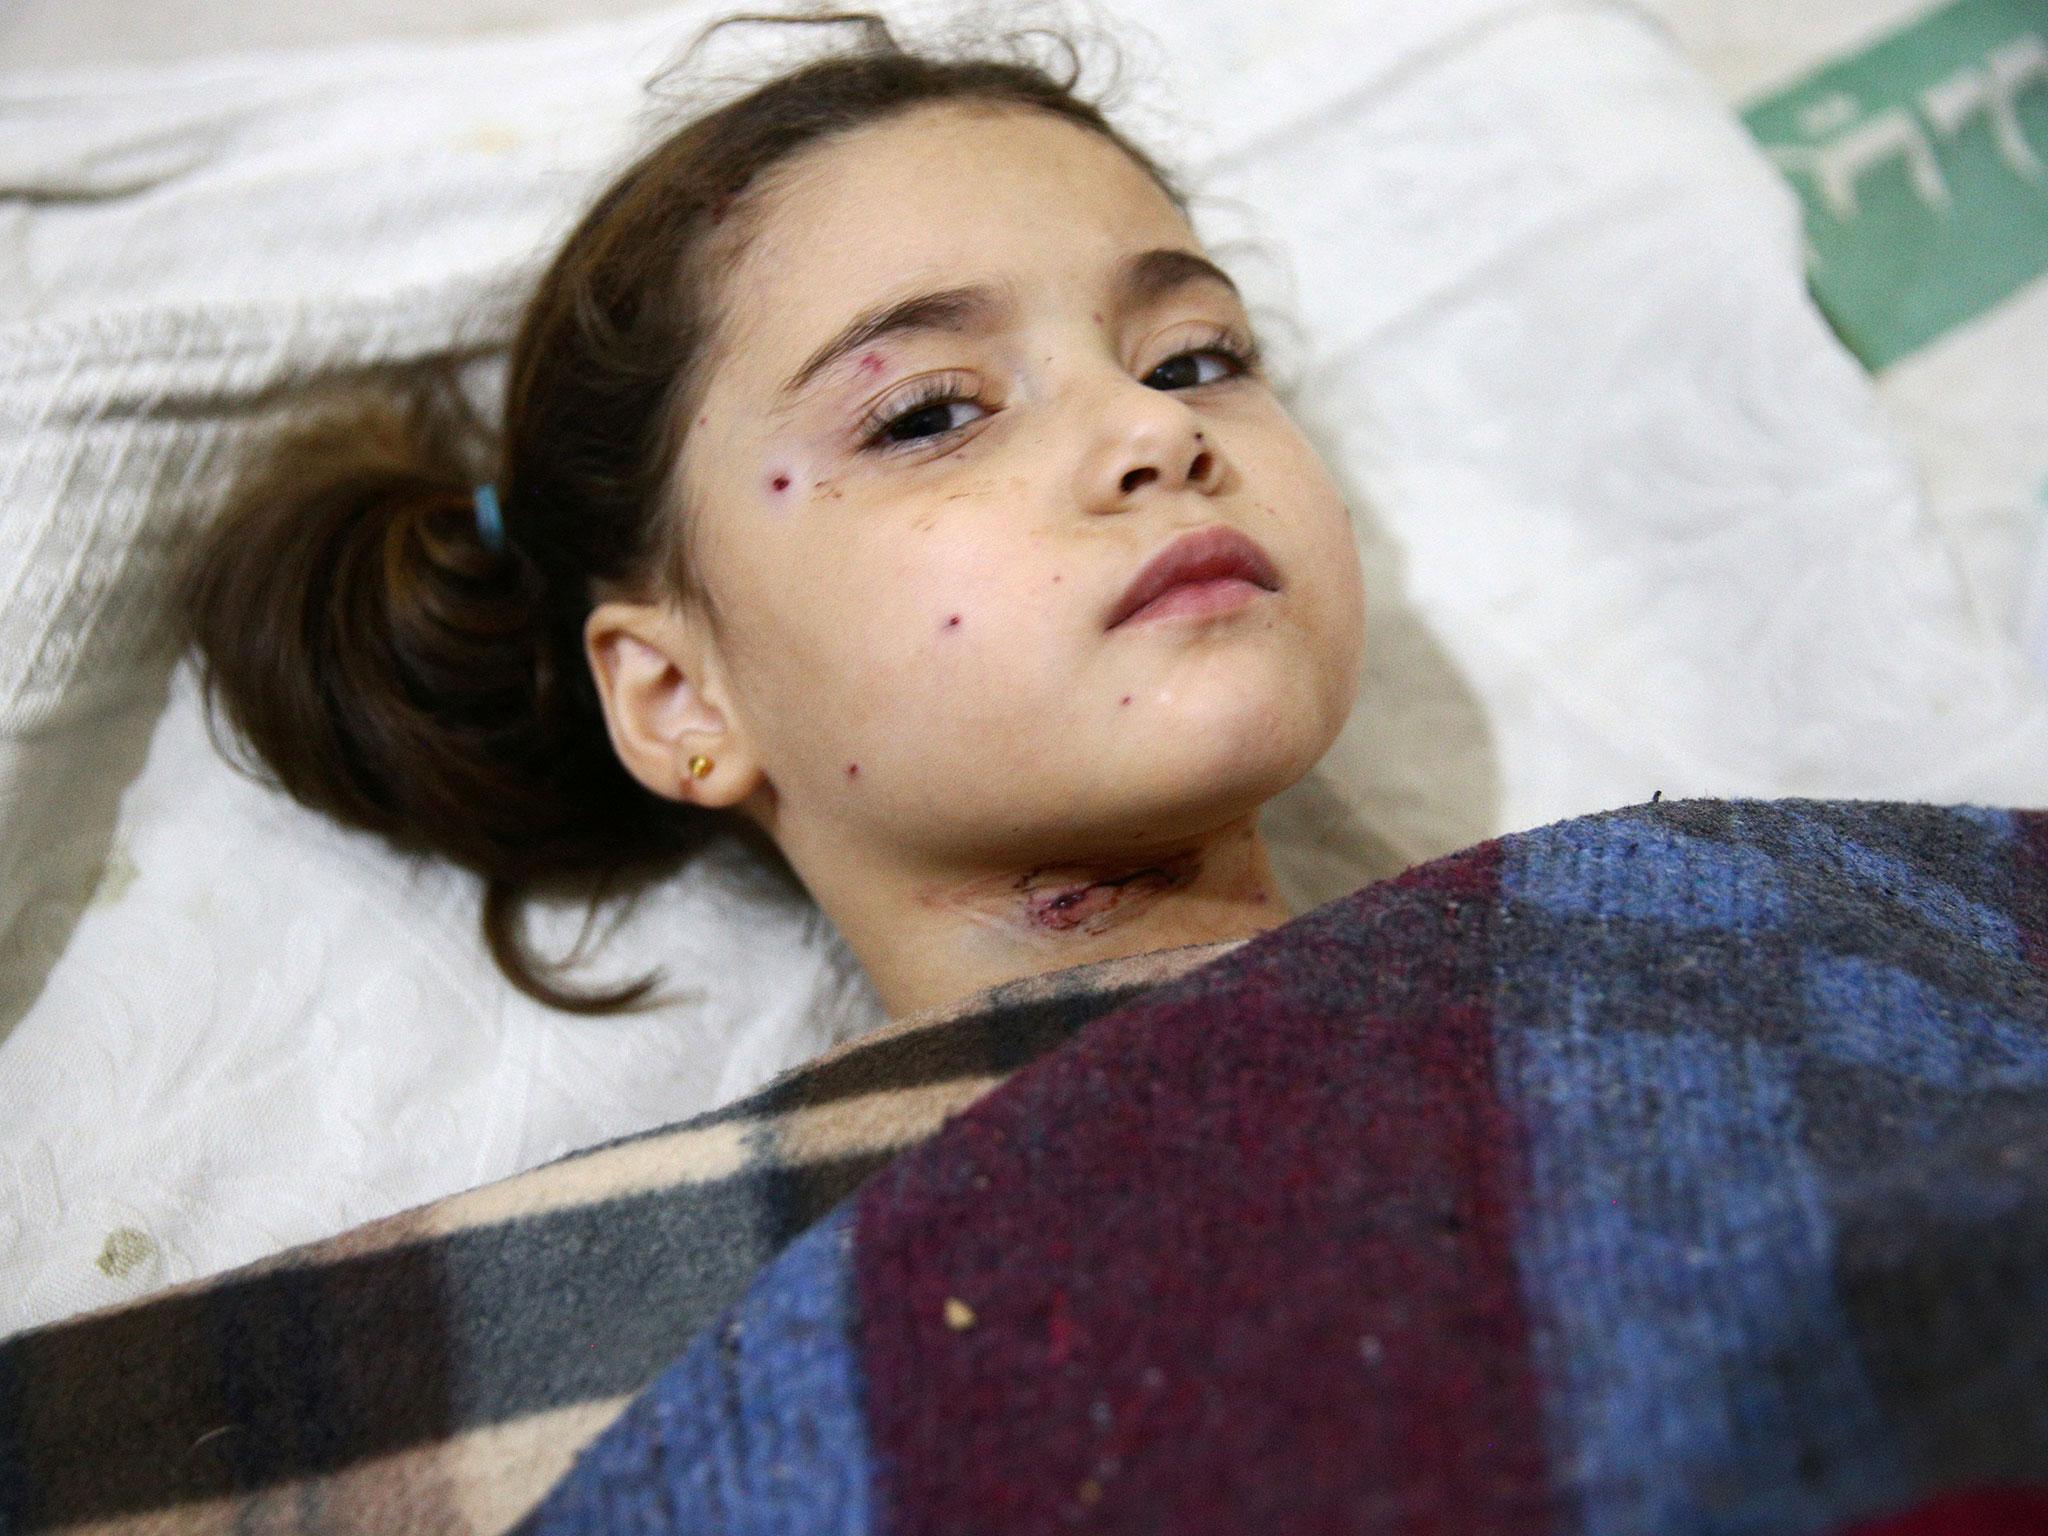 An injured girl rests in a field hospital after an air strike on a nursery in the rebel-held besieged city of Harasta, in the eastern Damascus suburb of Ghouta, Syria, 6 November, 2016.